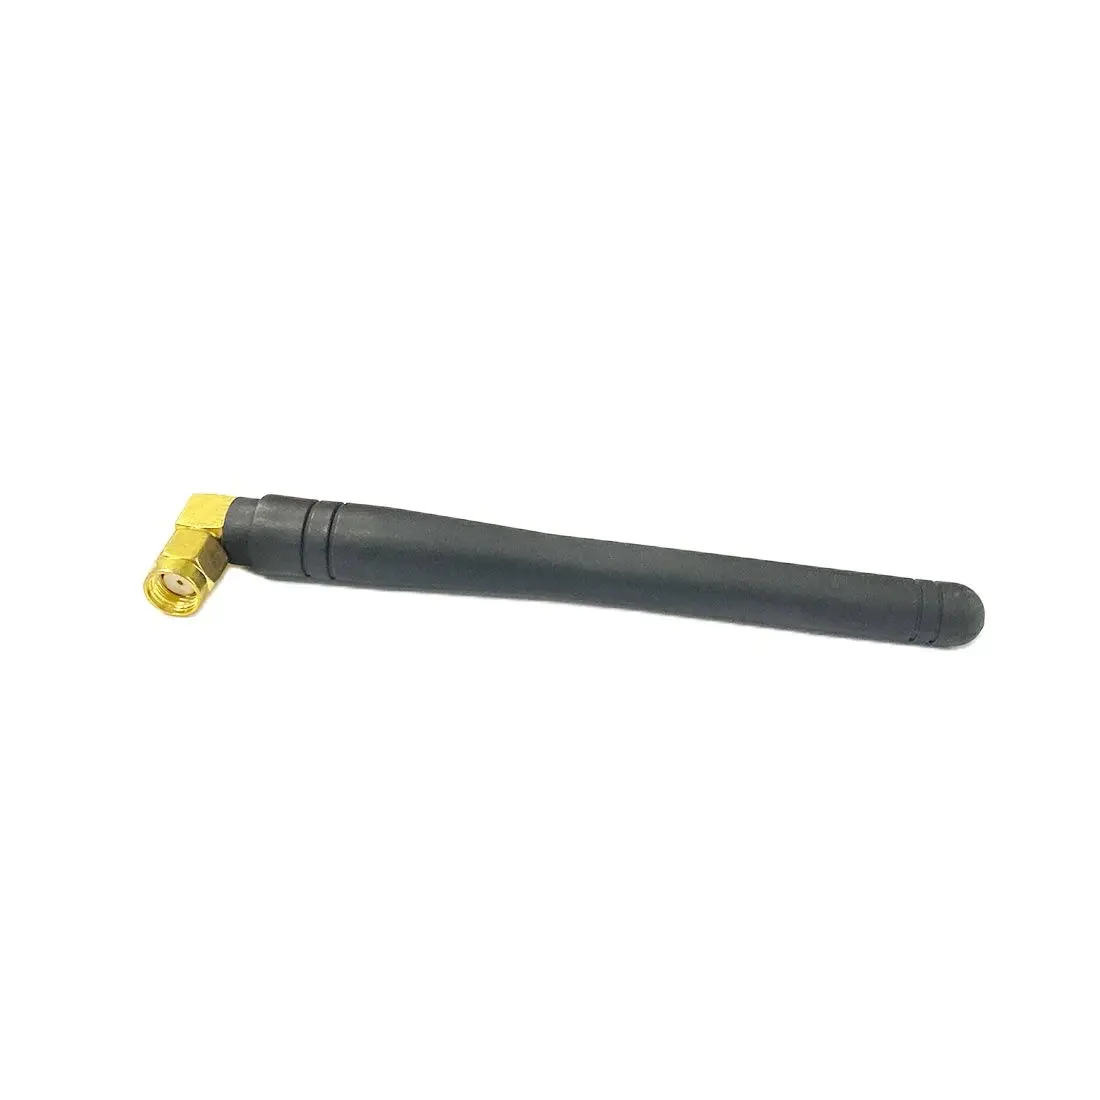 

1PC 3G GSM Antenna 3dBi 850/900/1800/1900/2100MHZ UMTS RP SMA Male Aerial 105mm Long